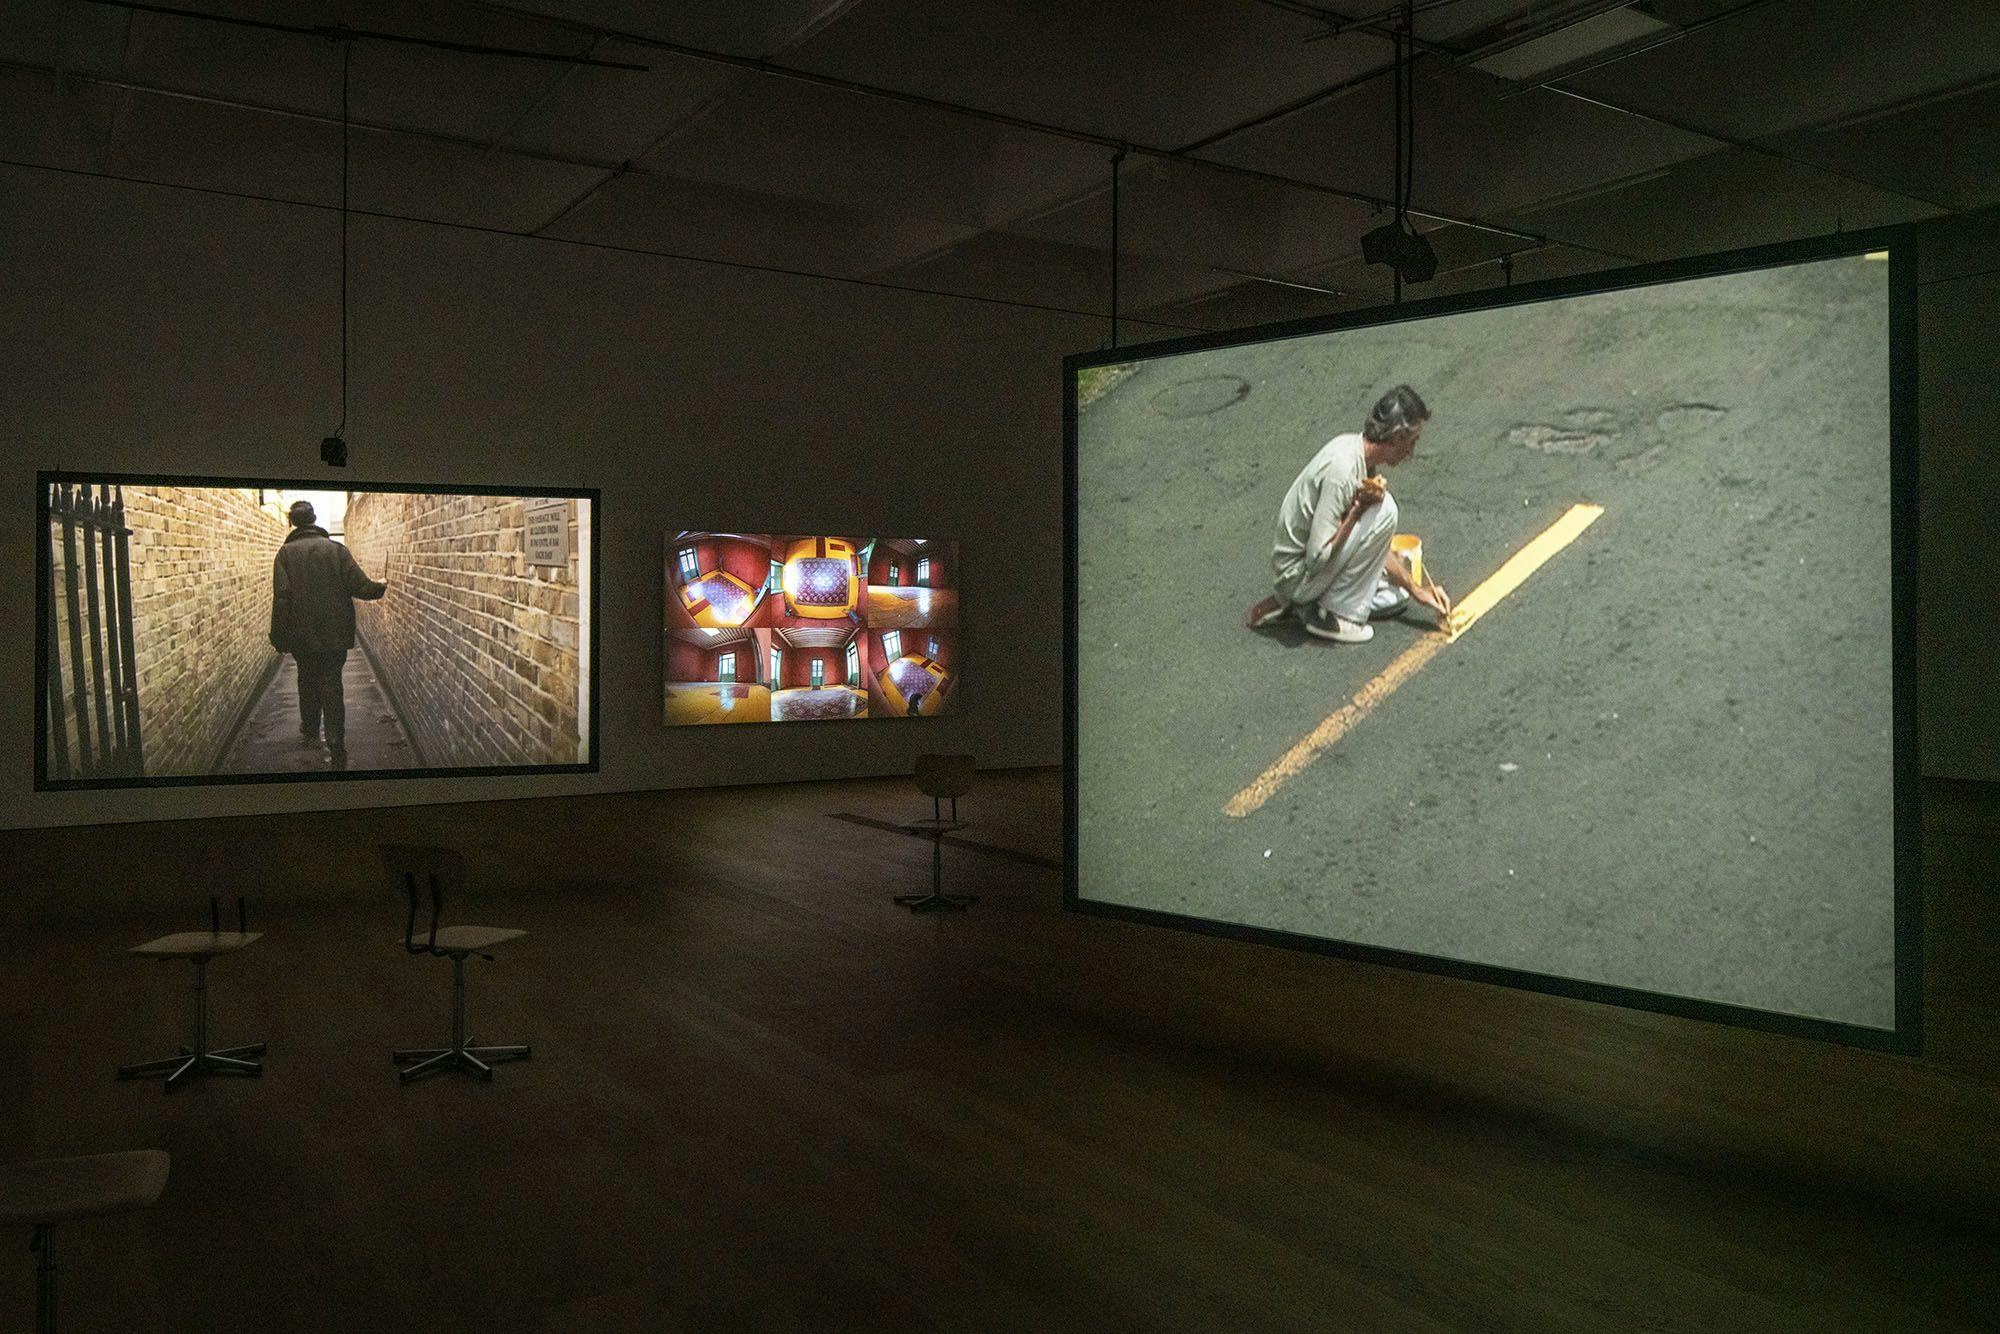 Installation view of the exhibition, Francis Alÿs: As Long as I’m Walking, at Musée cantonal des Beaux-Arts in Lausanne, dated 2021.